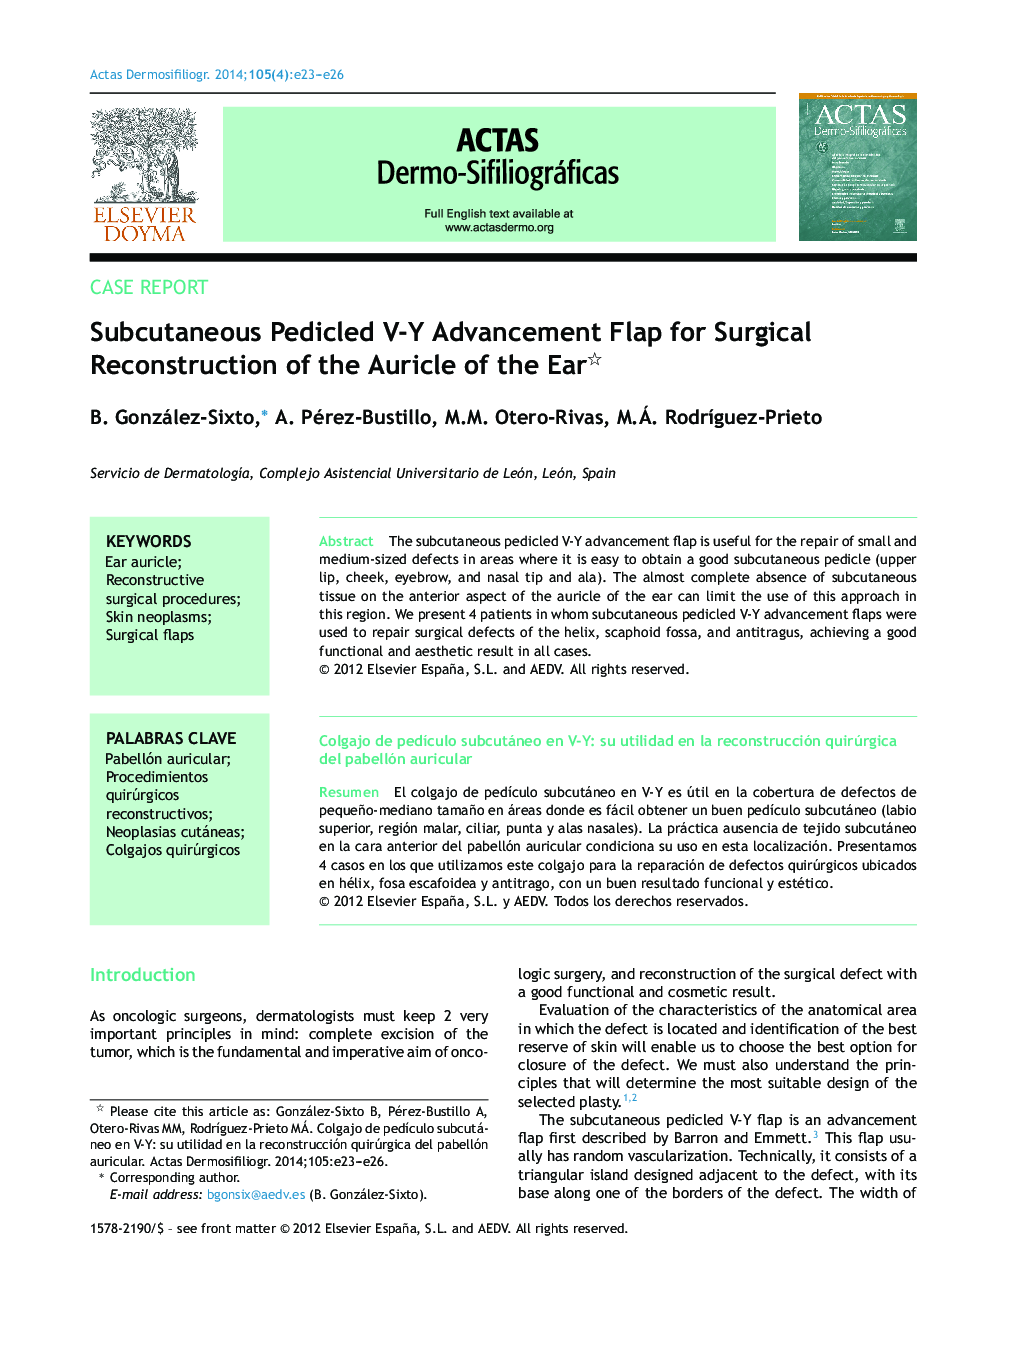 Subcutaneous Pedicled V-Y Advancement Flap for Surgical Reconstruction of the Auricle of the Ear 